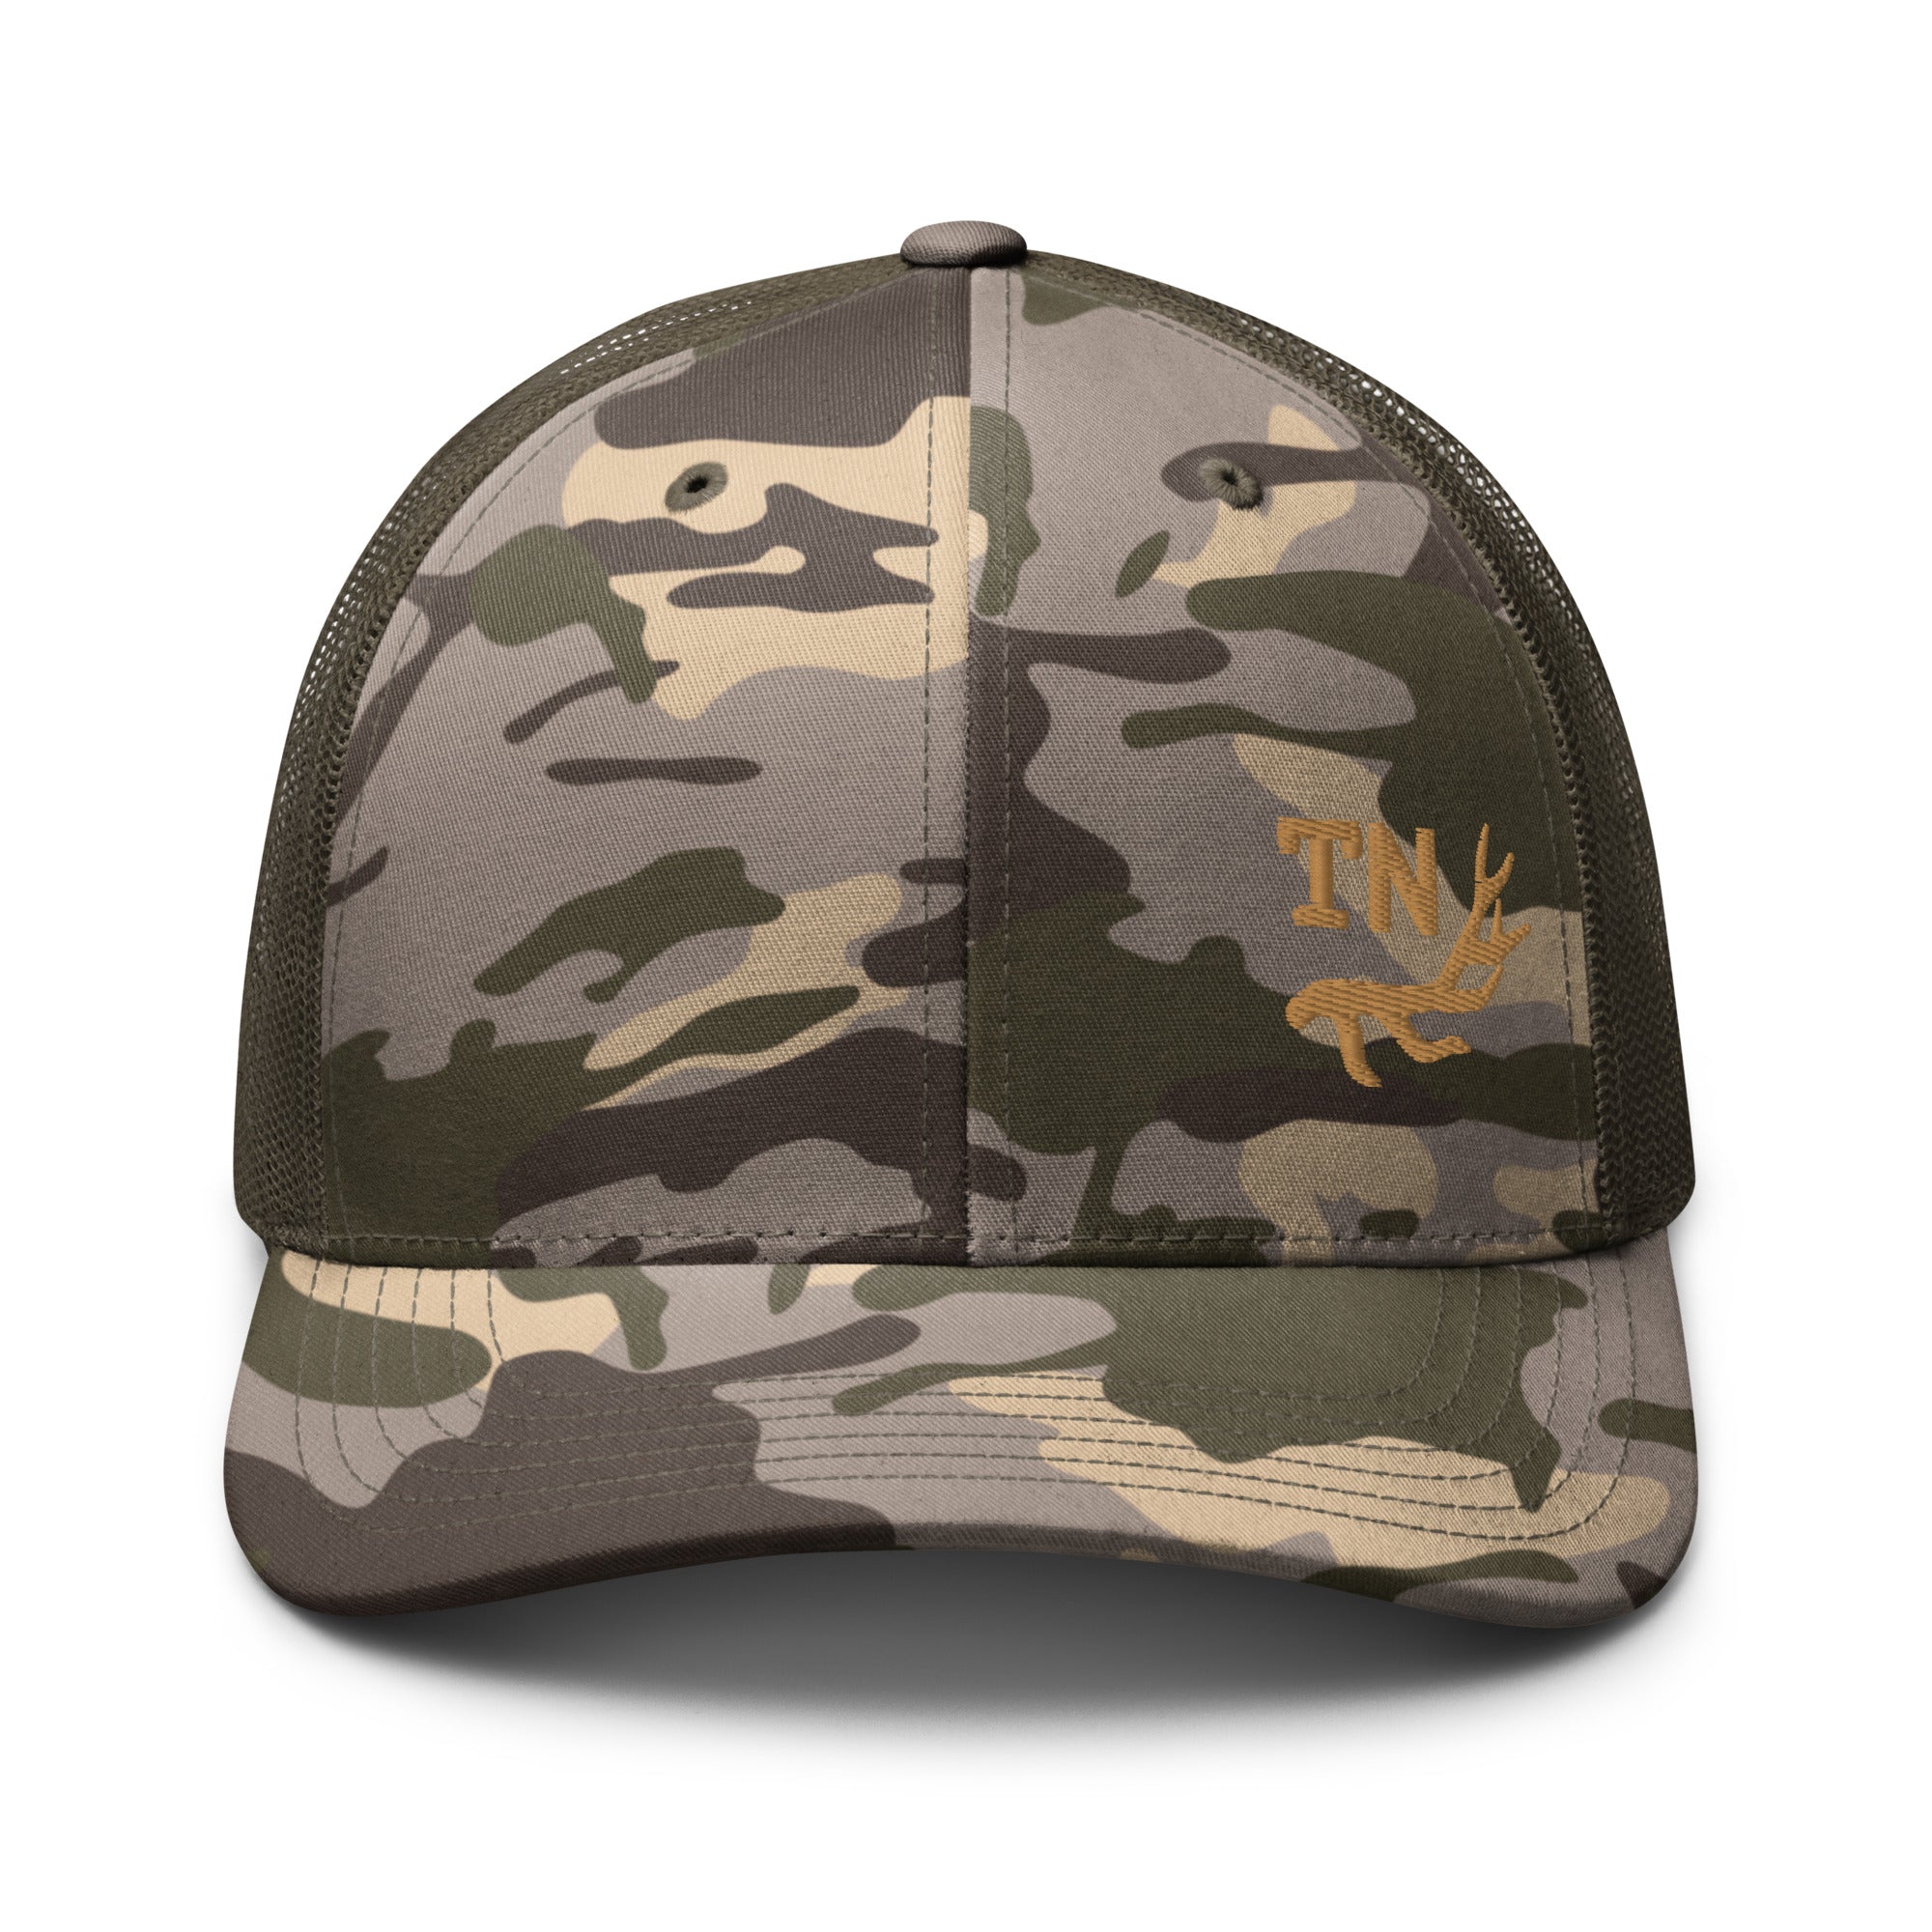 camouflage-trucker-hat-camo-olive-front-655e67786c501.jpg